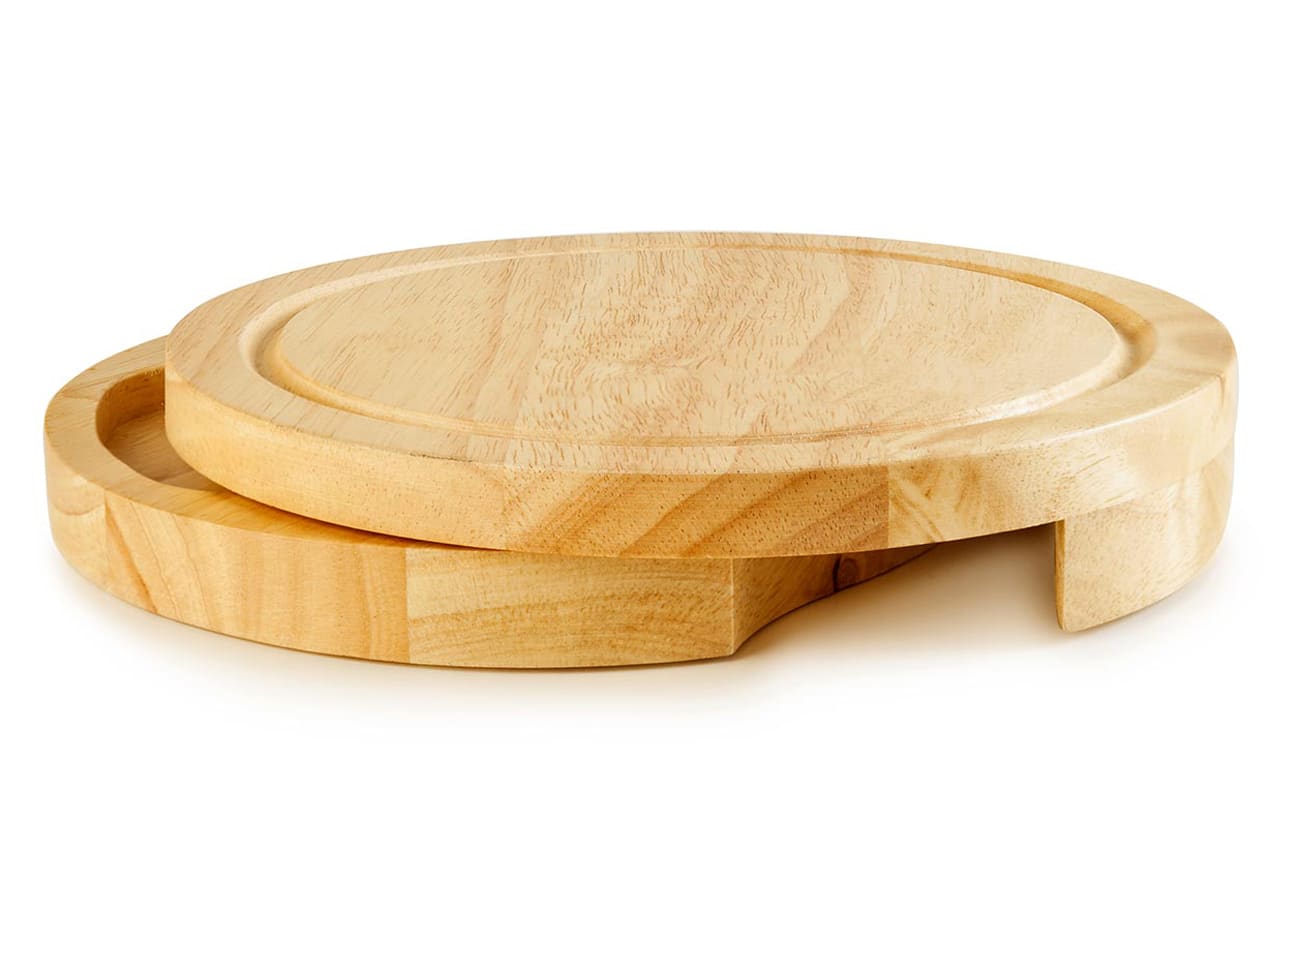 Tray for cheese - with glass bell - Ø 20 cm - Ibili - Meilleur du Chef